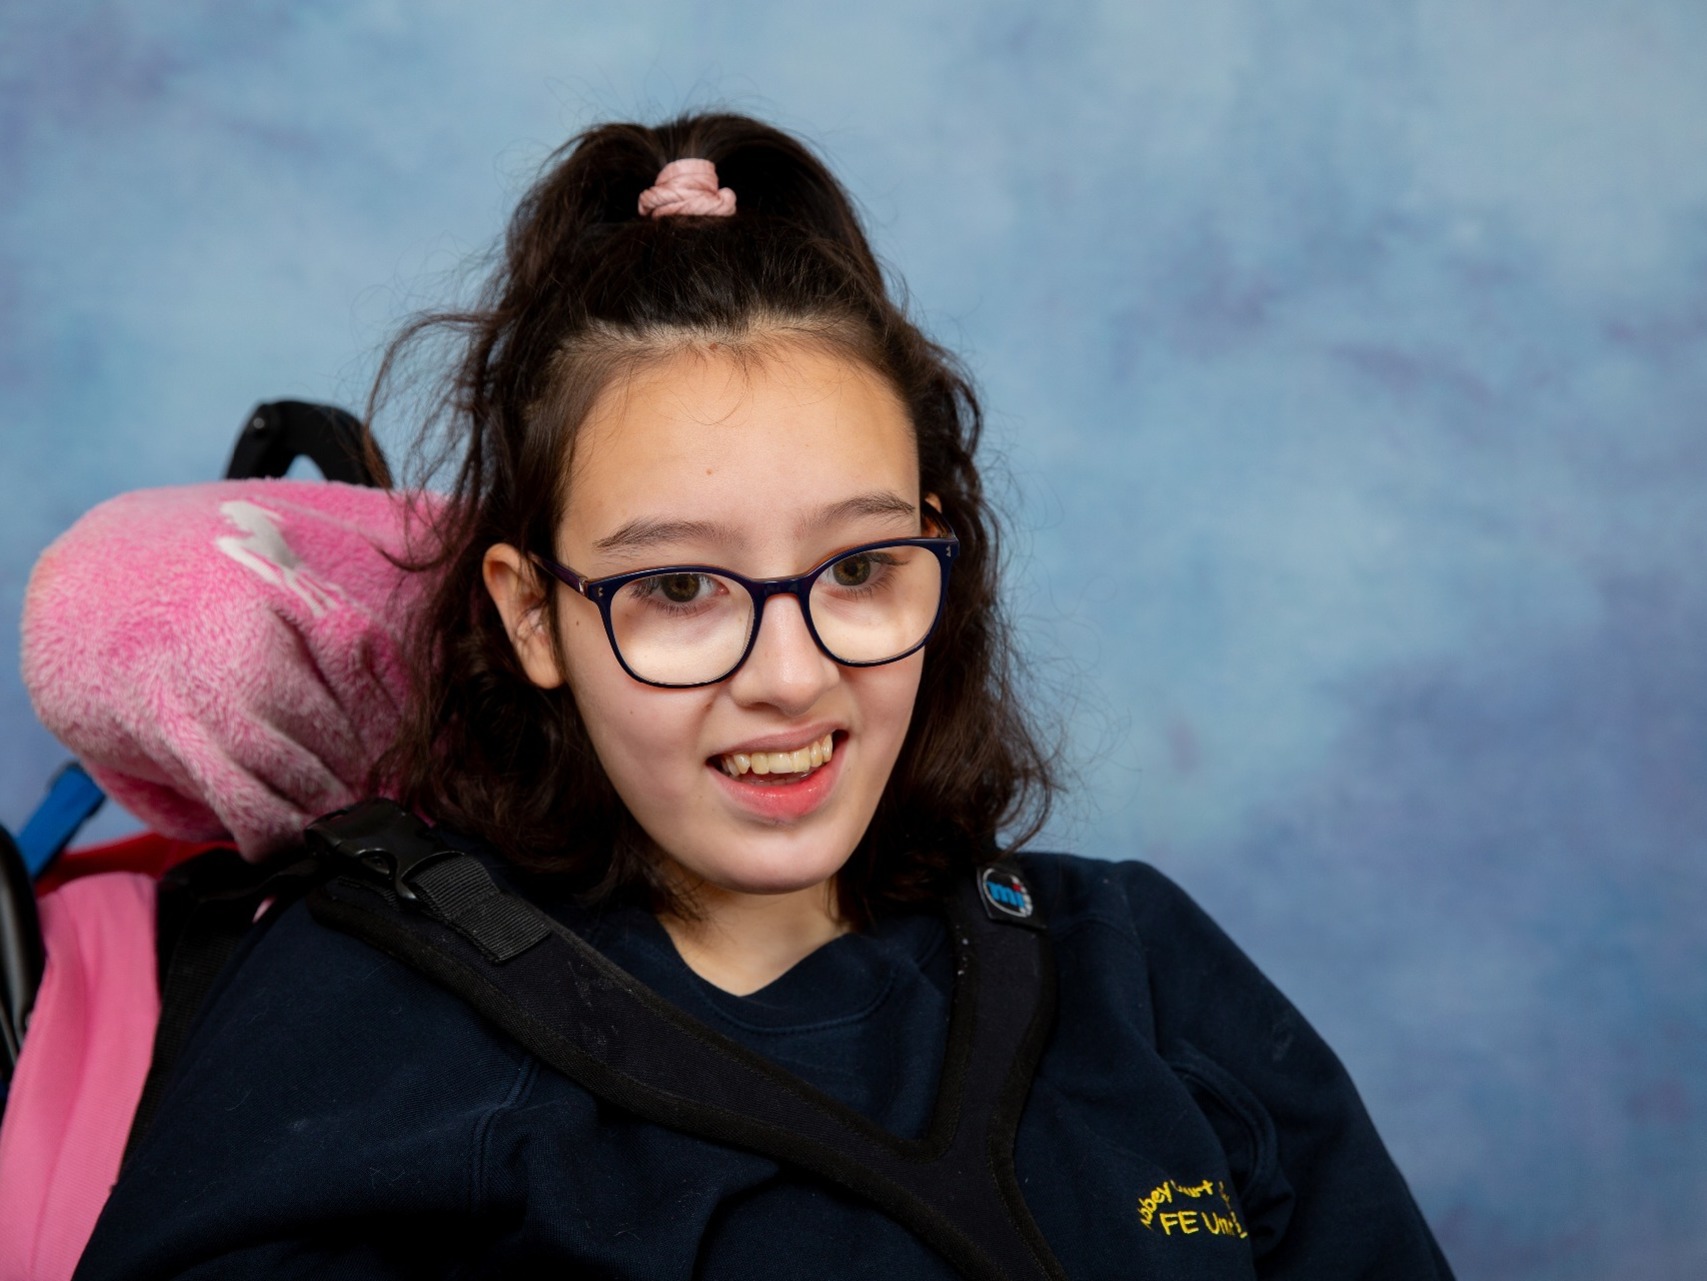 Natural and organic photograph of this young disabled girl in her school portrait